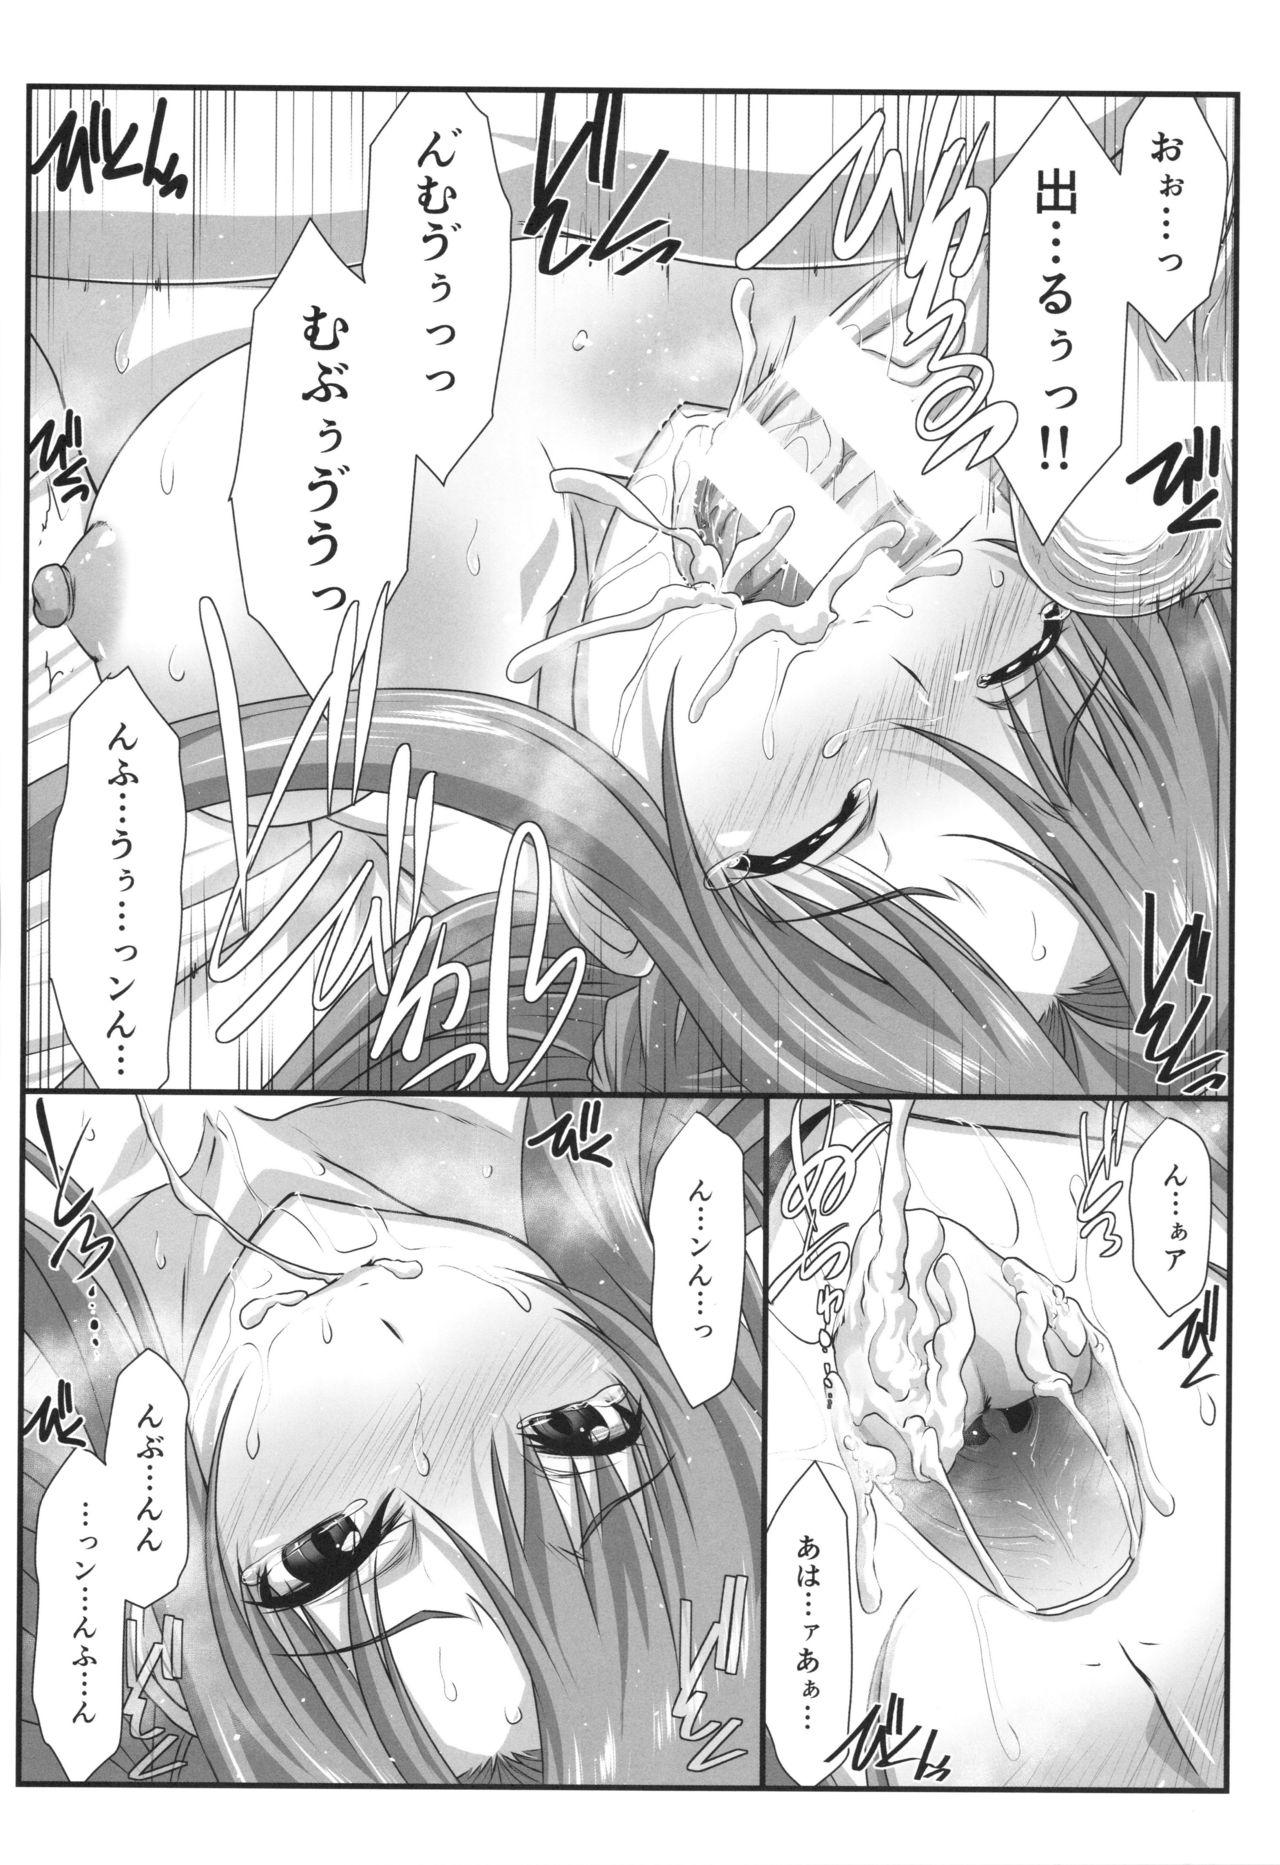 Dildo Astral Bout Ver. 41 - Sword art online Siririca - Page 9